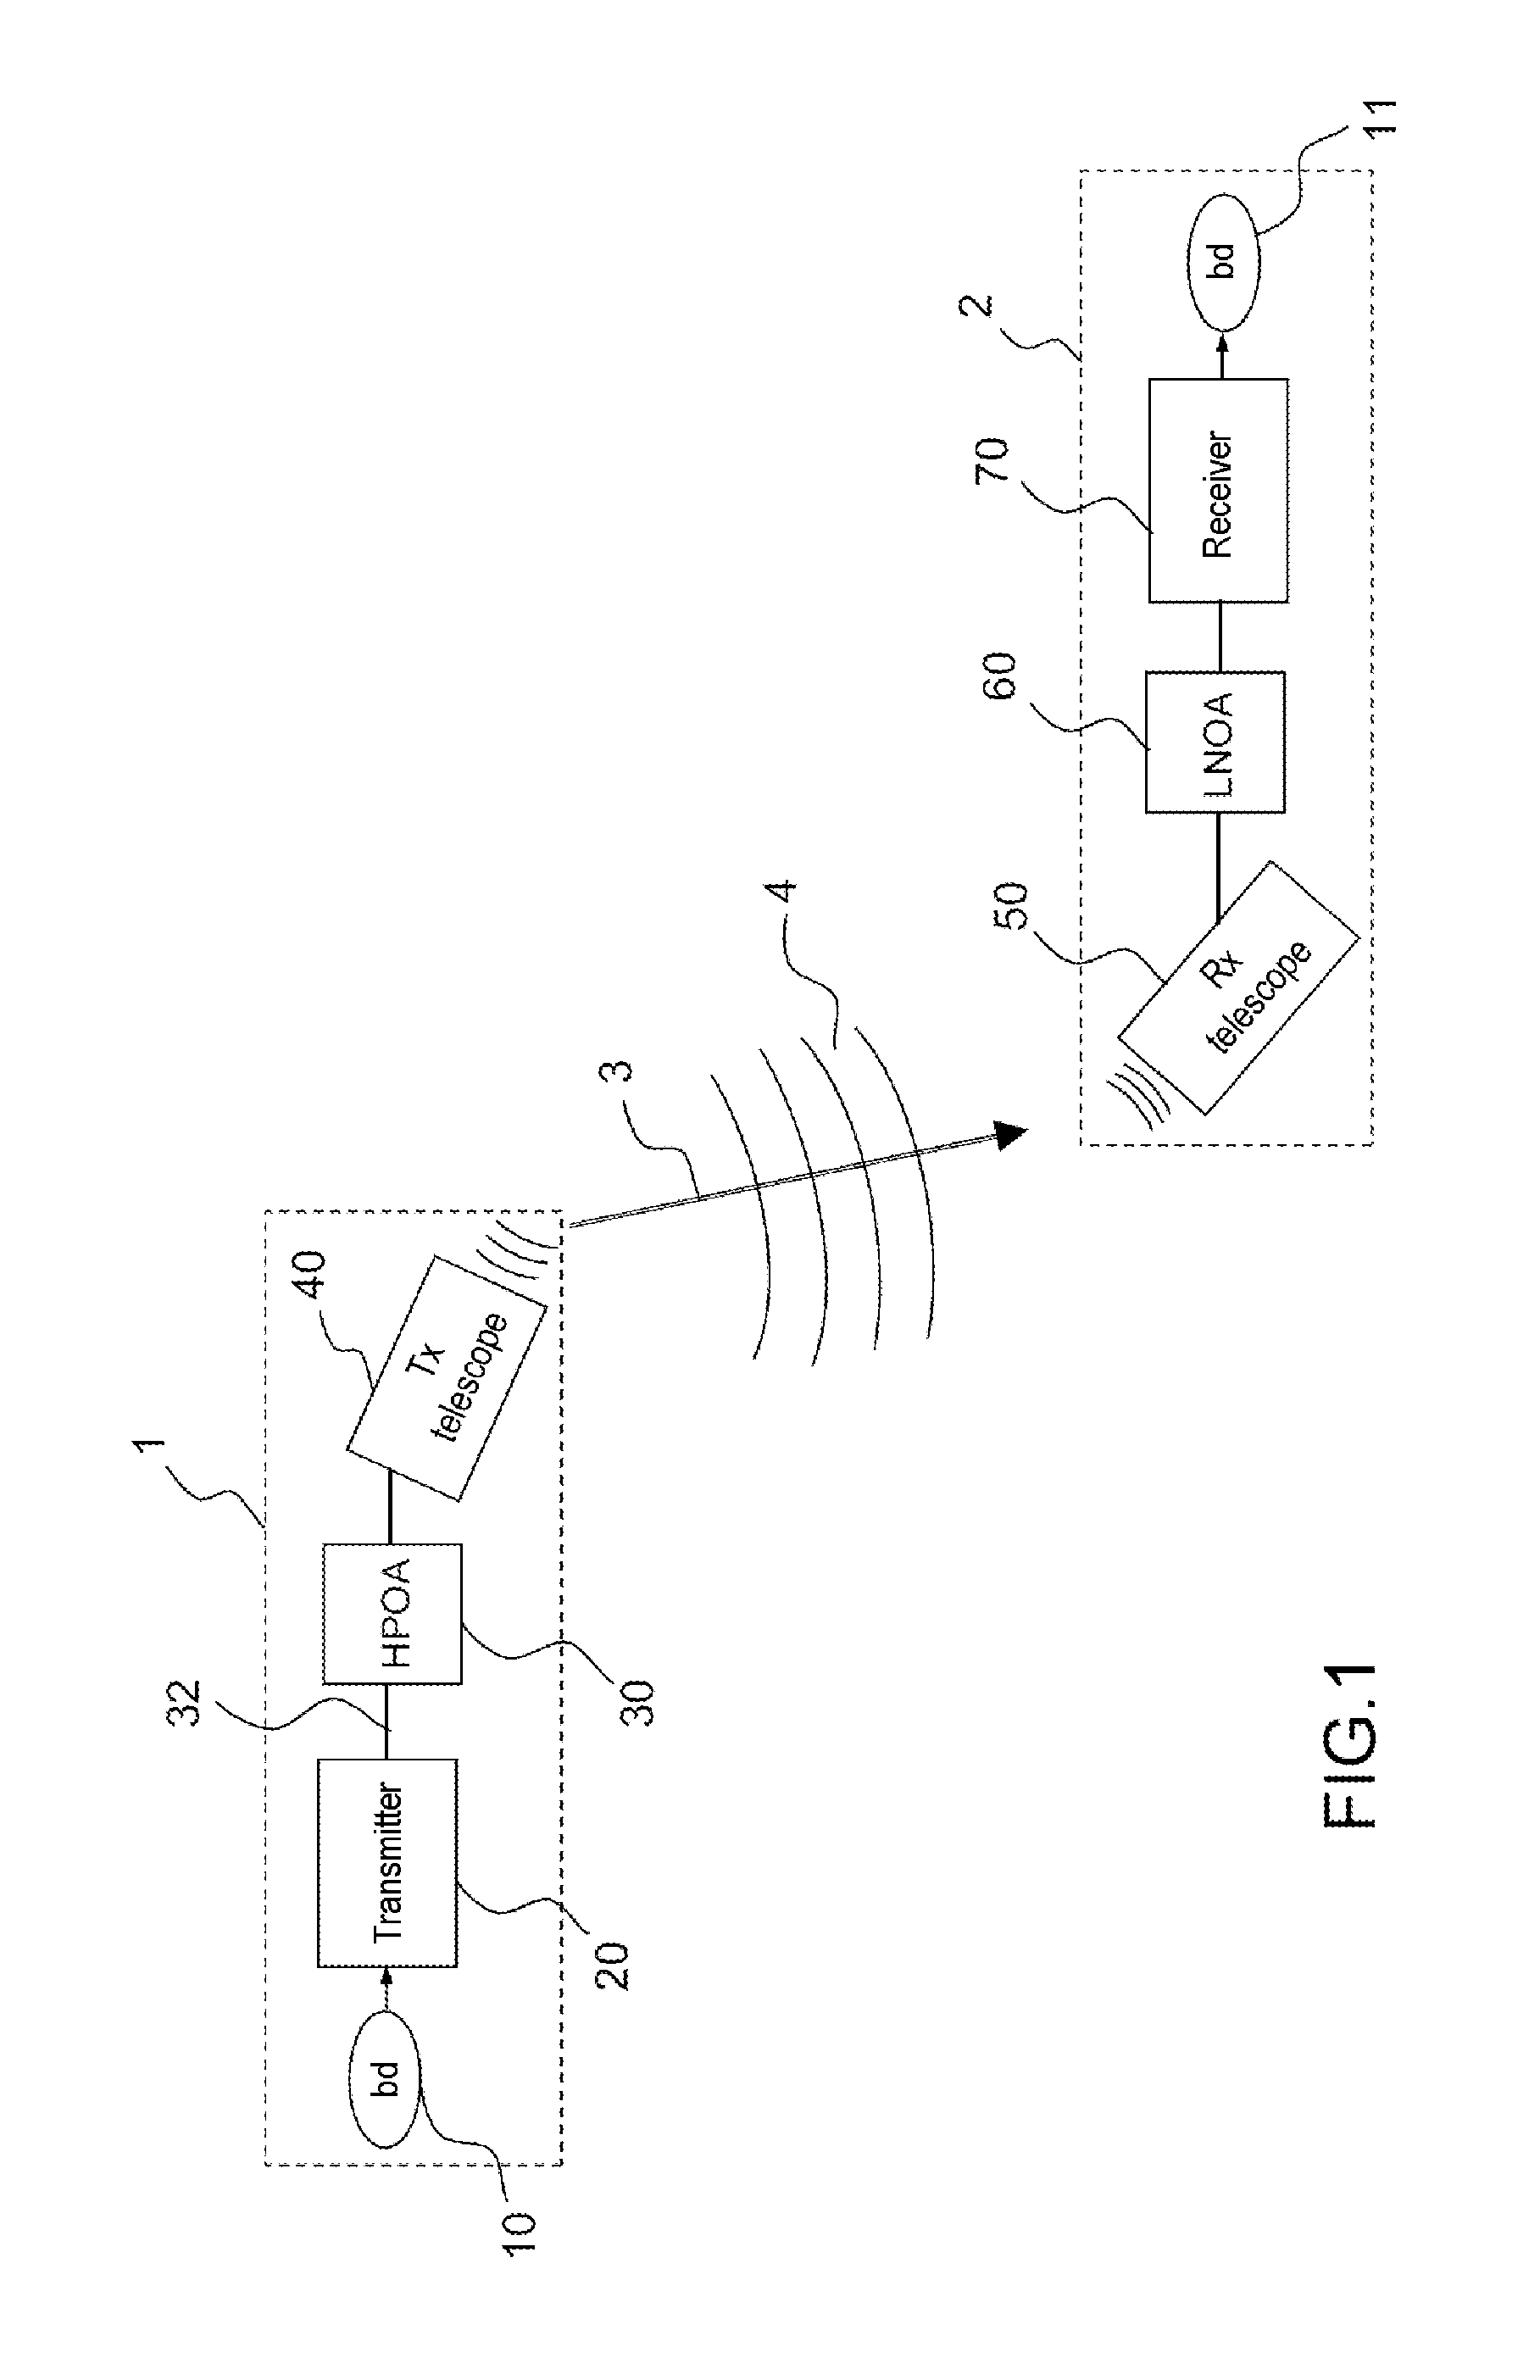 Method for transmitting and method for receiving a binary data stream, transmitter and receiver for carrying out the method